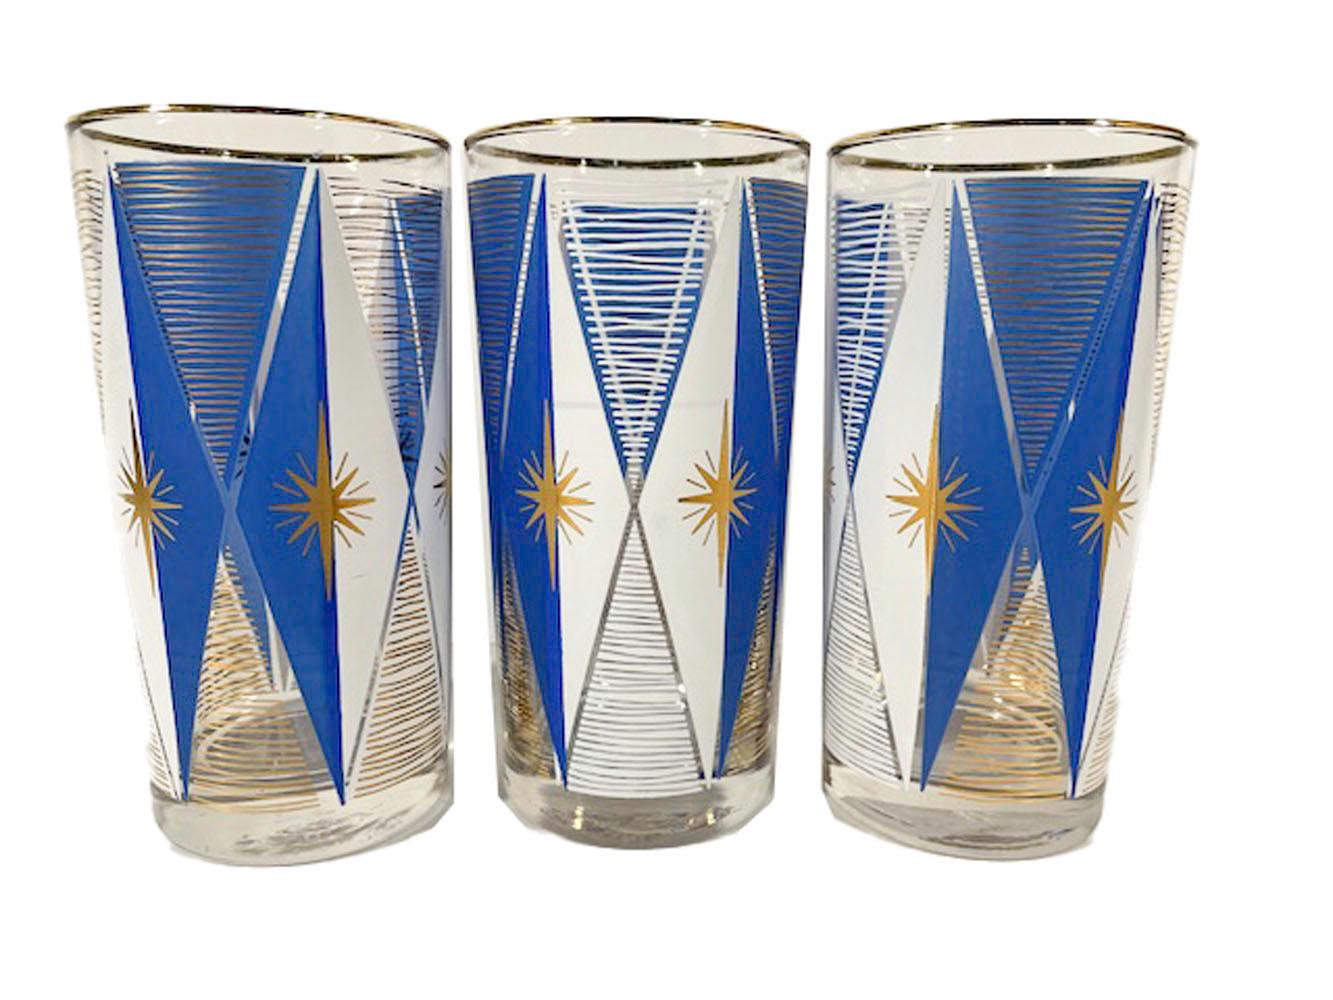 Six vintage highball glasses by Libbey in the Atomic taste having a gold starburst centered on an elongated diamond of blue and white enamel and with irregular horizontal gold lines in the space between the tops and bottoms ov the diamonds.